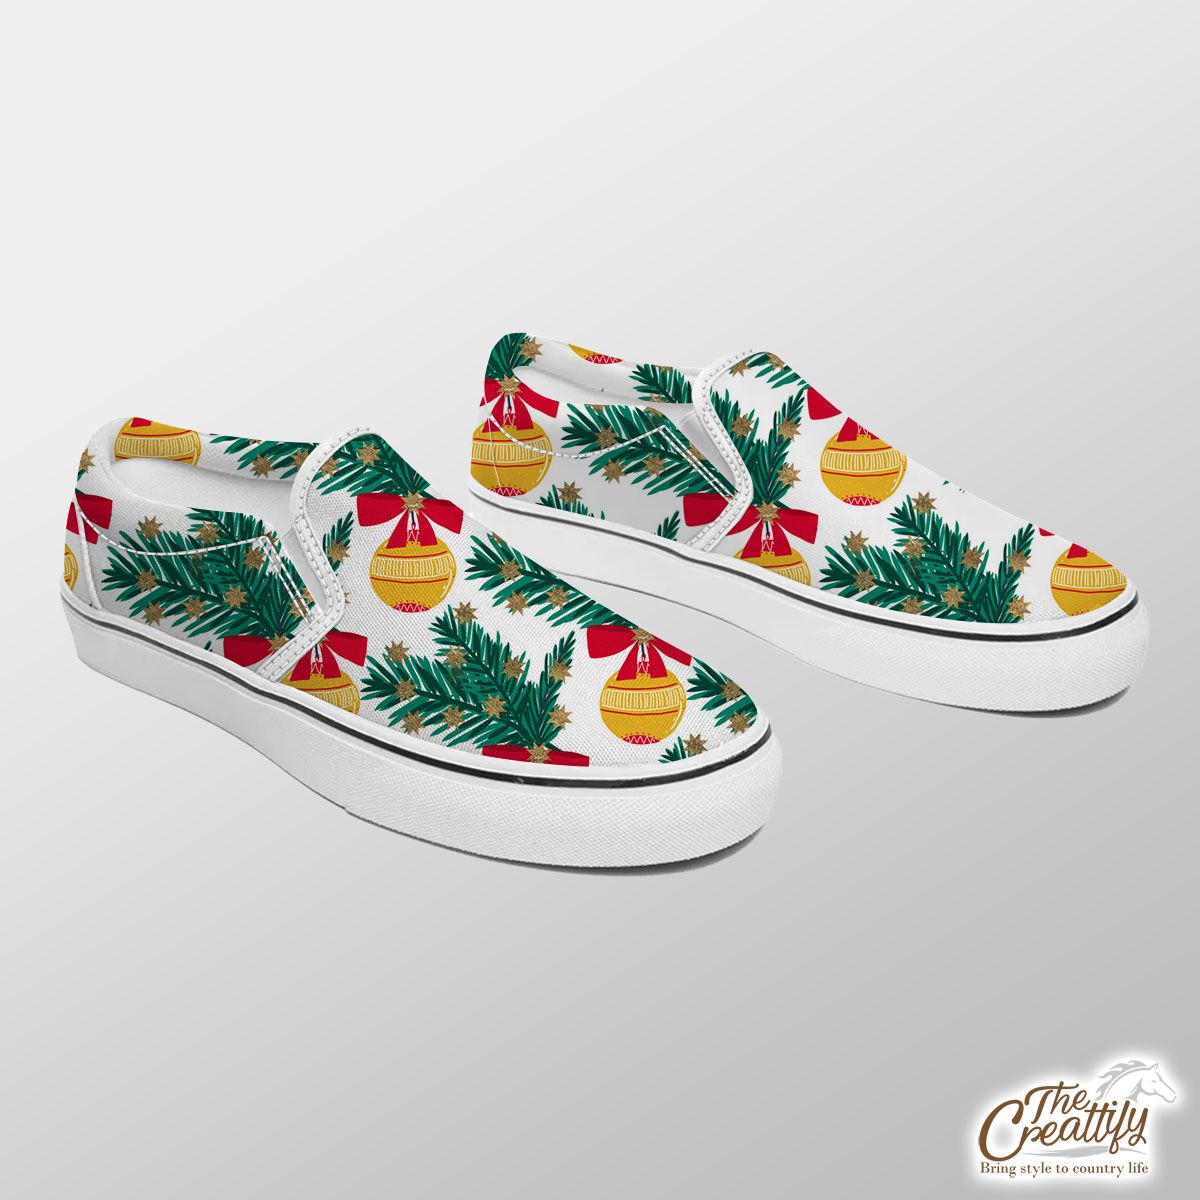 Christmas Balls With Pine Tree Branch Seamless Pattern Slip On Sneakers